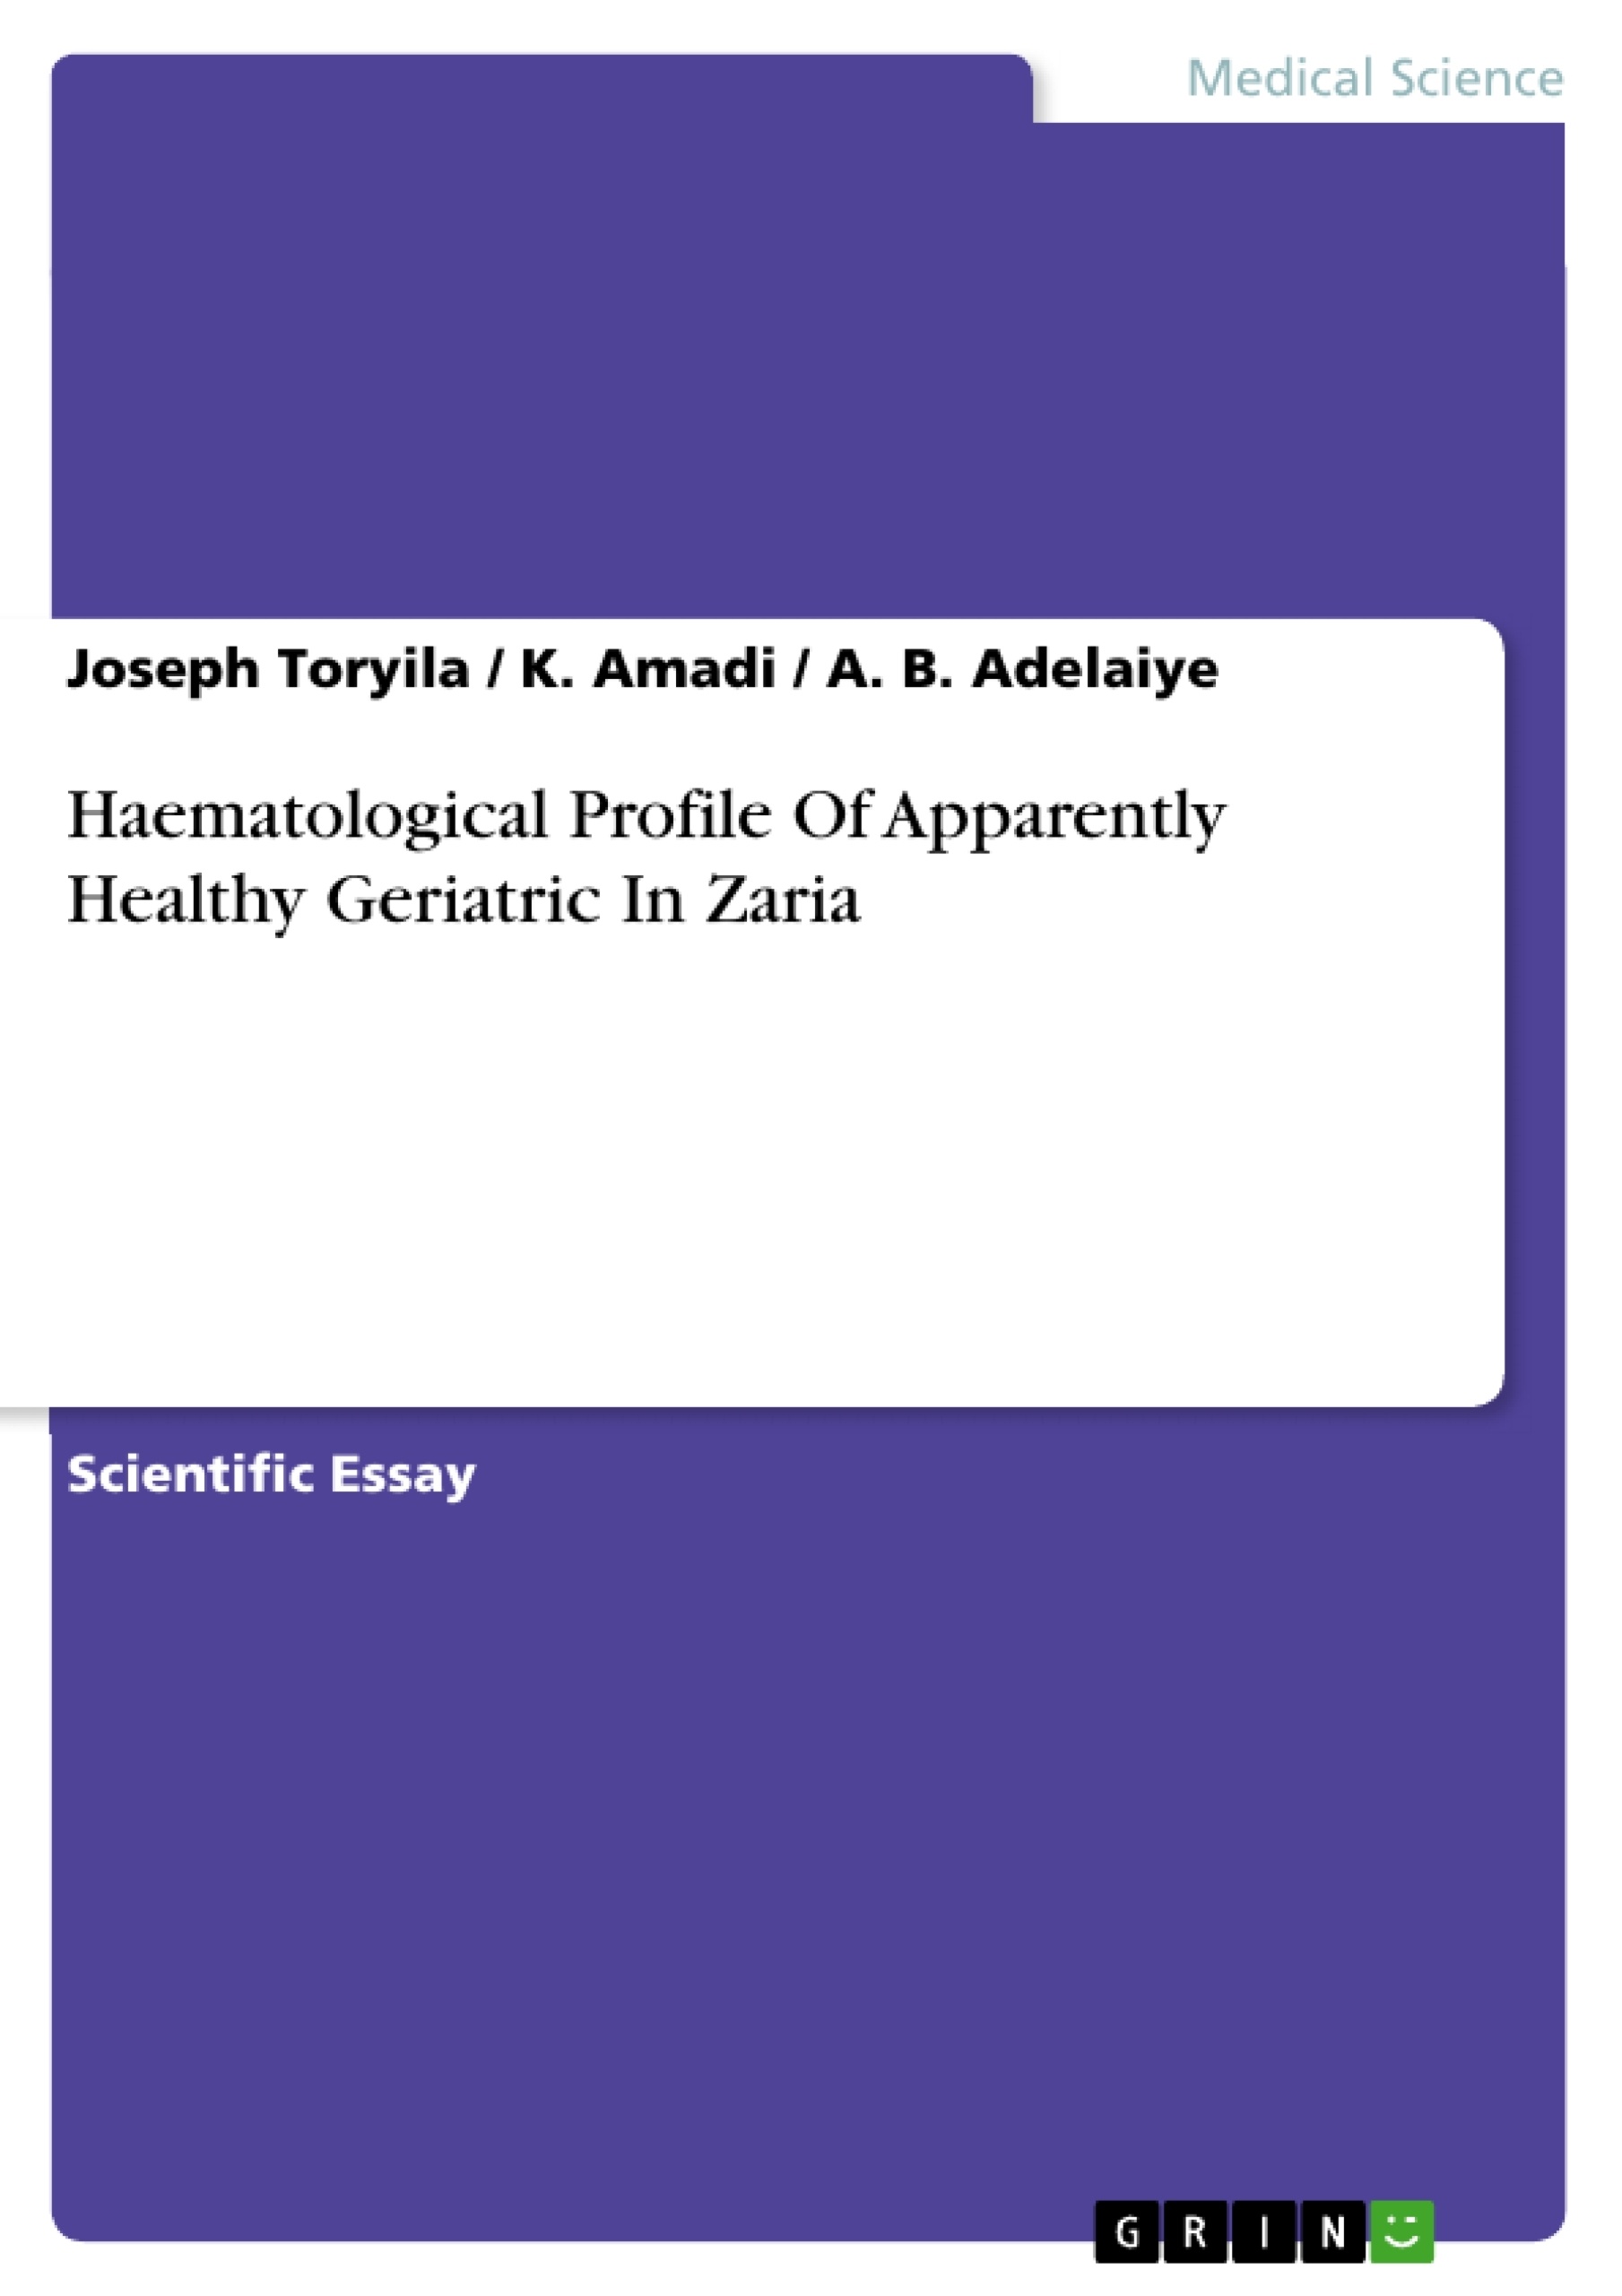 Título: Haematological Profile Of Apparently Healthy Geriatric In Zaria